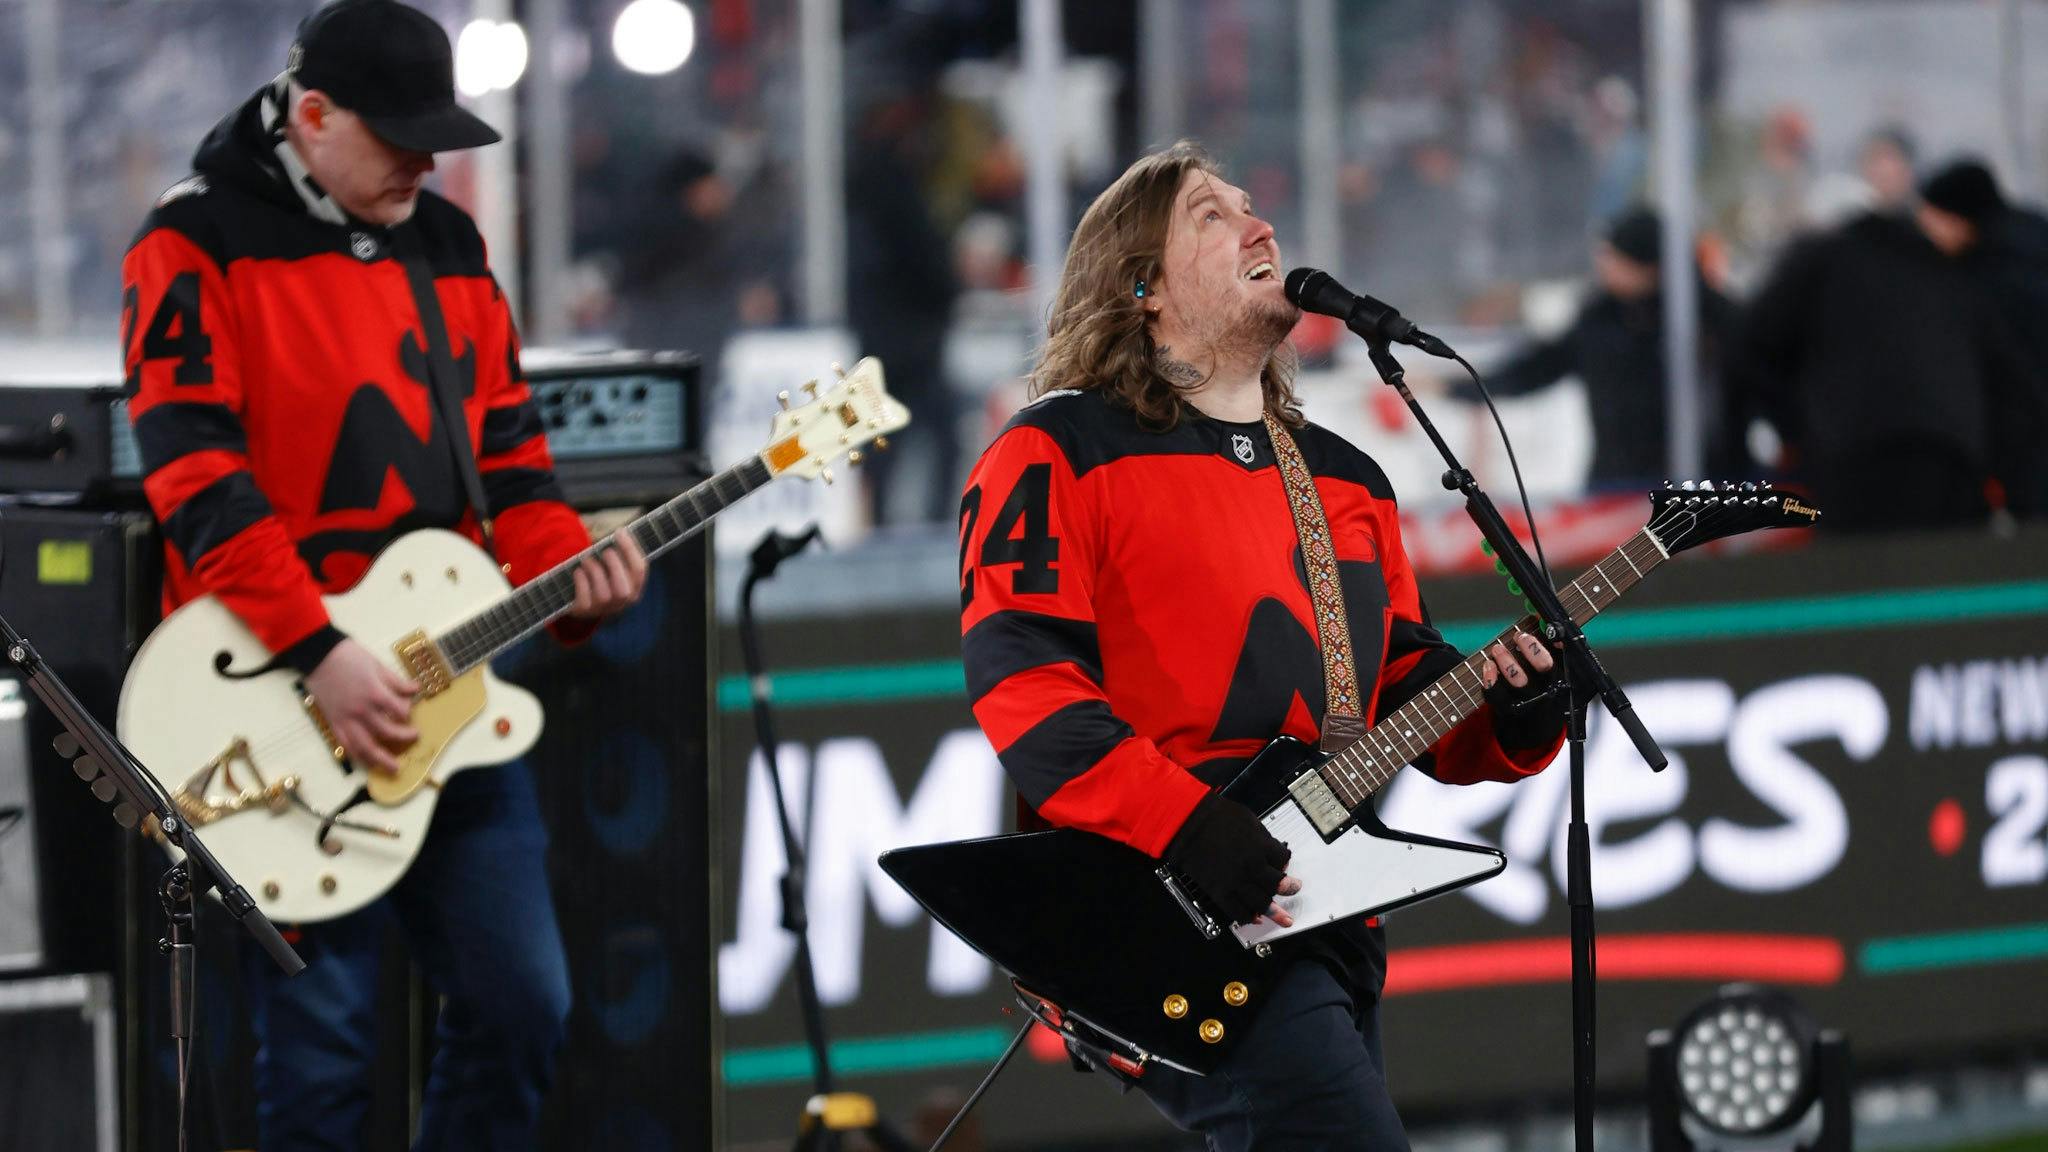 In pictures: The Gaslight Anthem’s huge NHL performance at MetLife Stadium